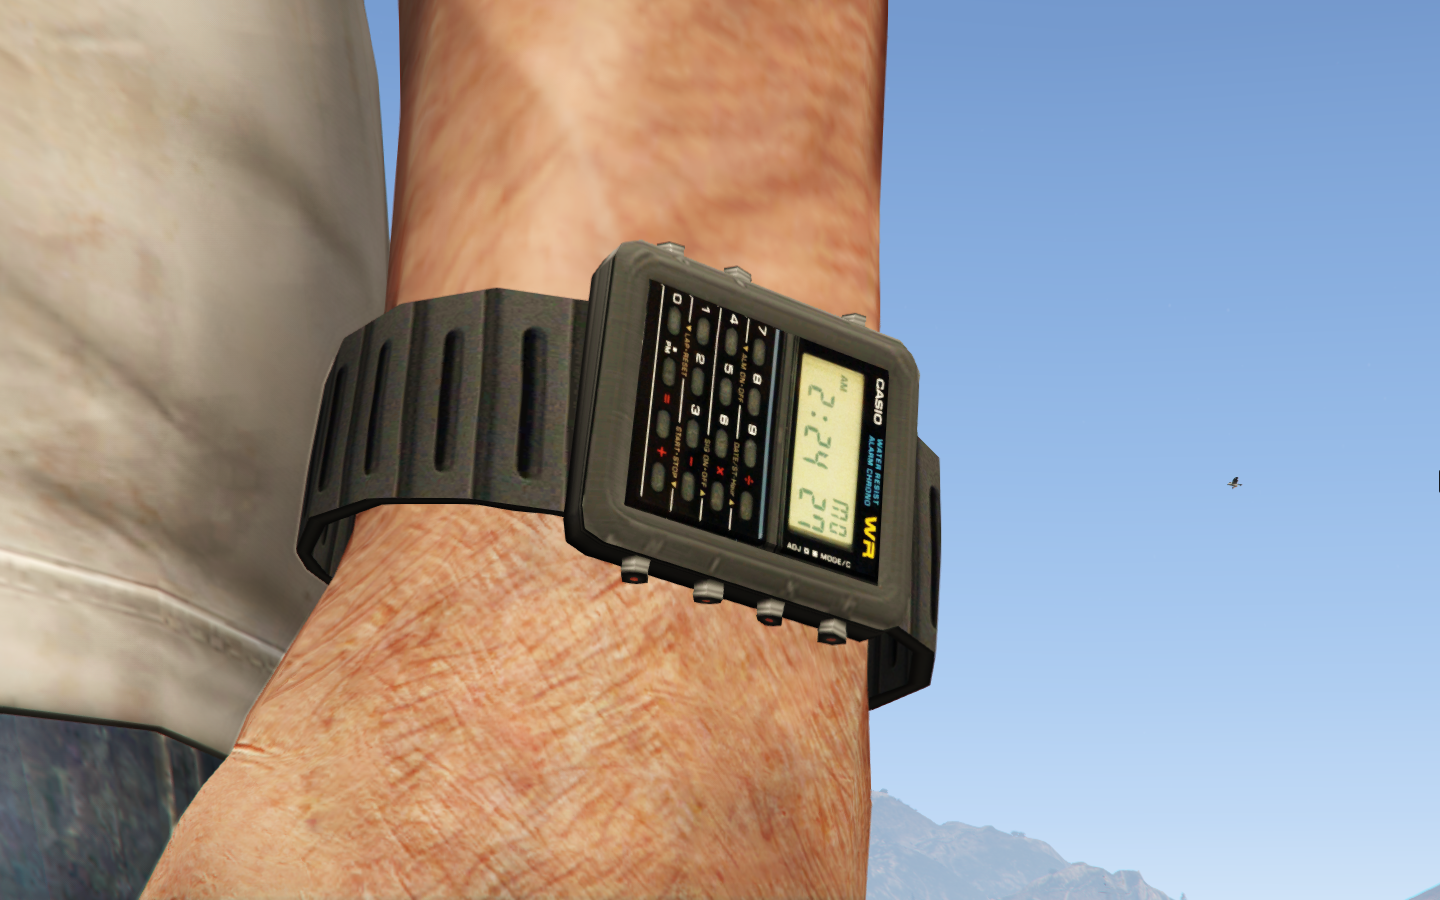 where to buy watches in gta 5